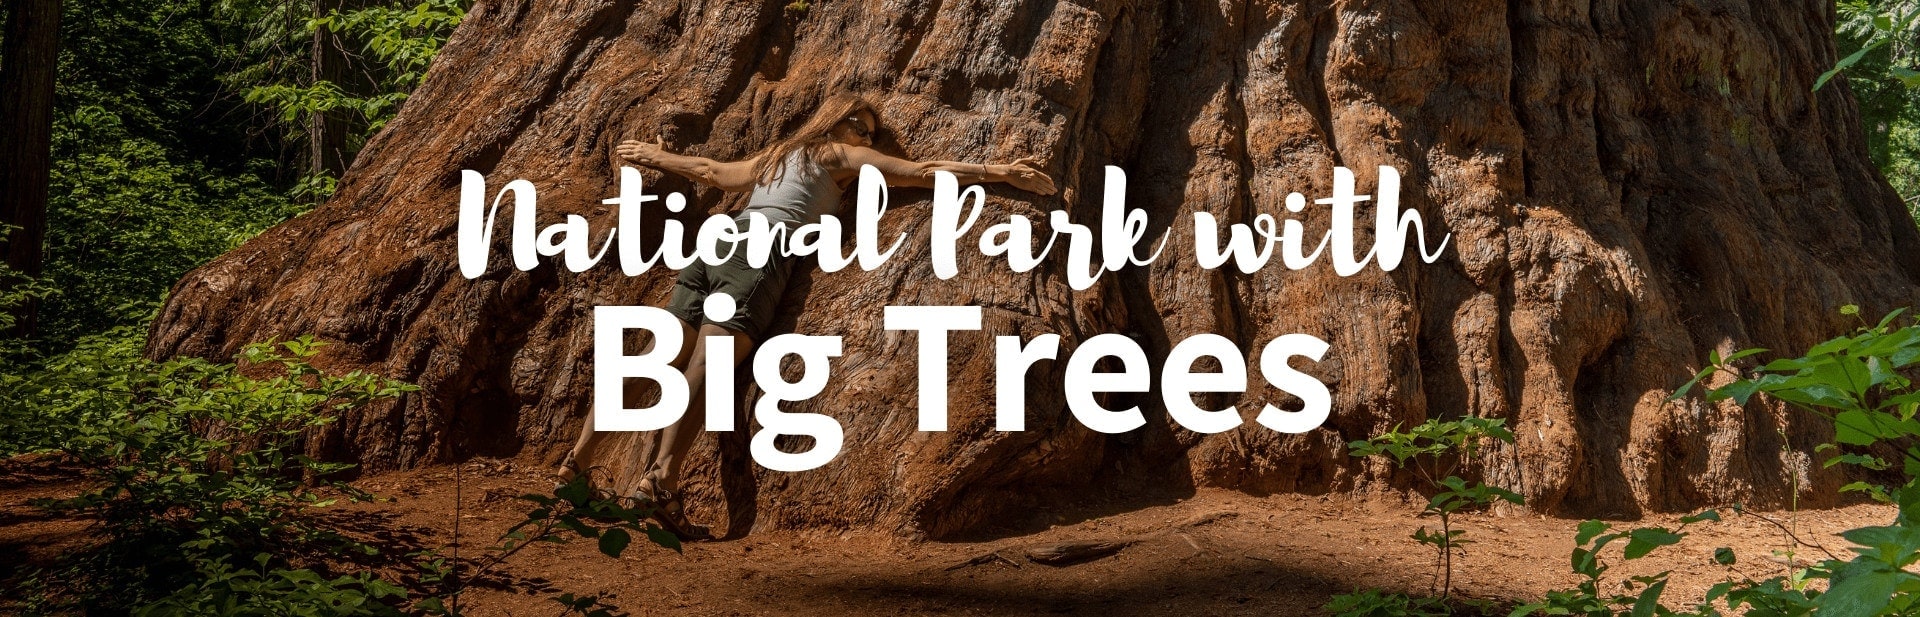 17 National Park With Big Trees: Guide To Identification and Location